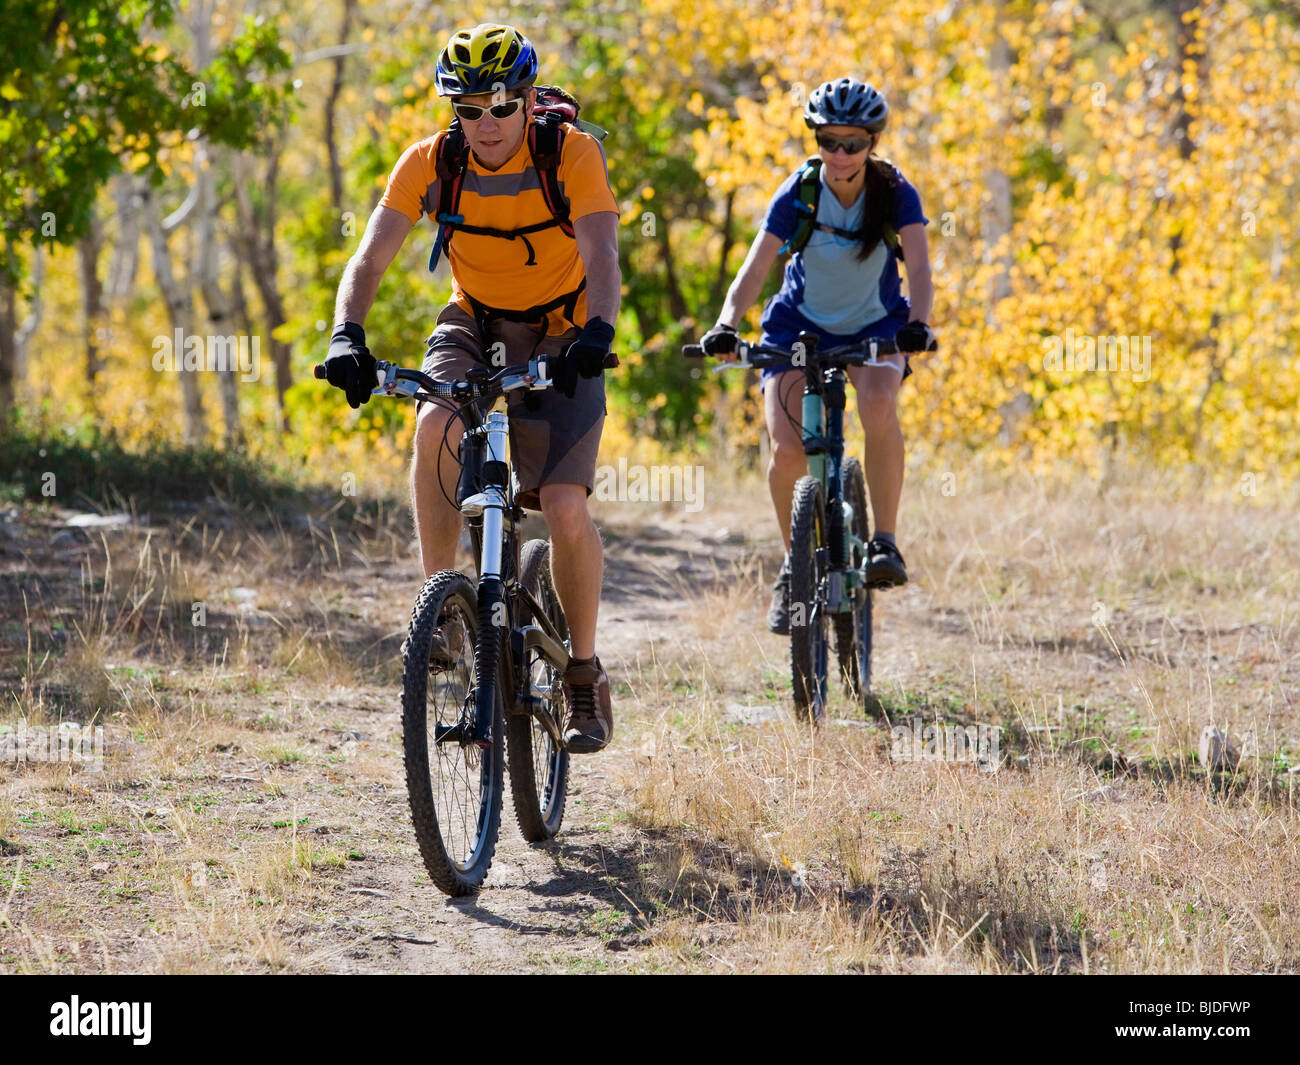 Male and female mountain bikers. Stock Photo